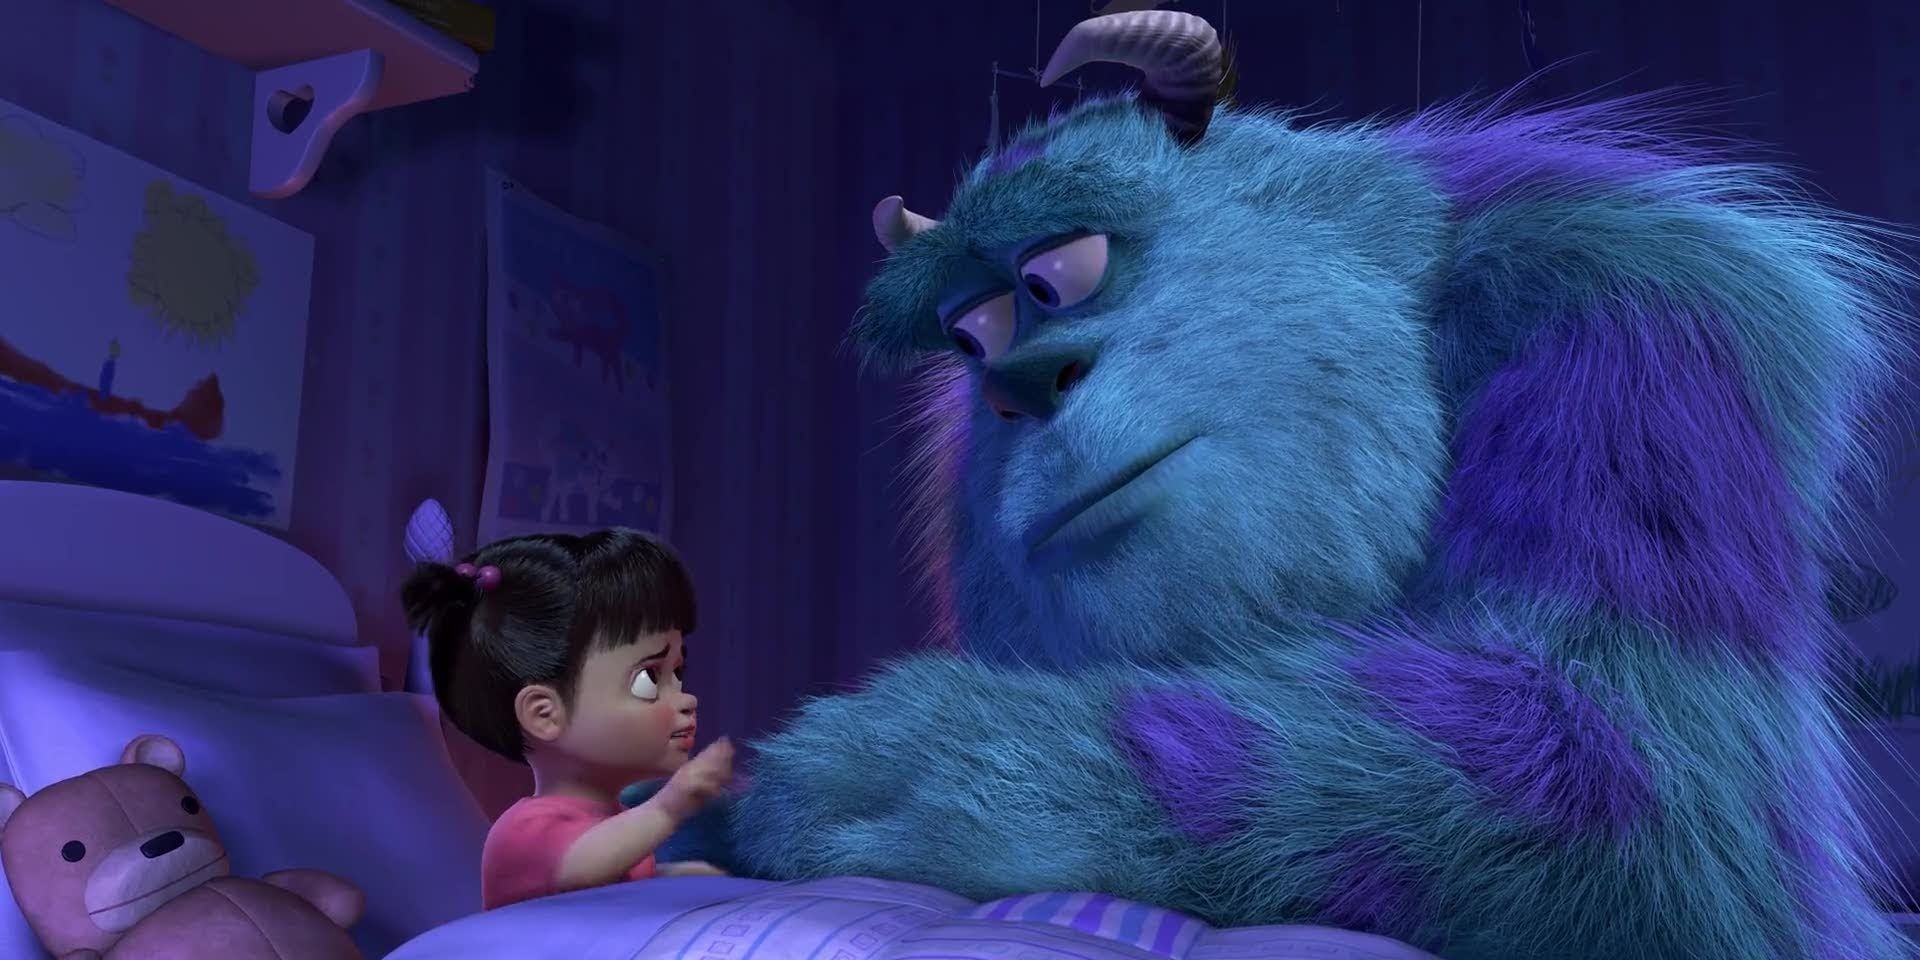 Boo and Sulley holding hands in Monsters Inc